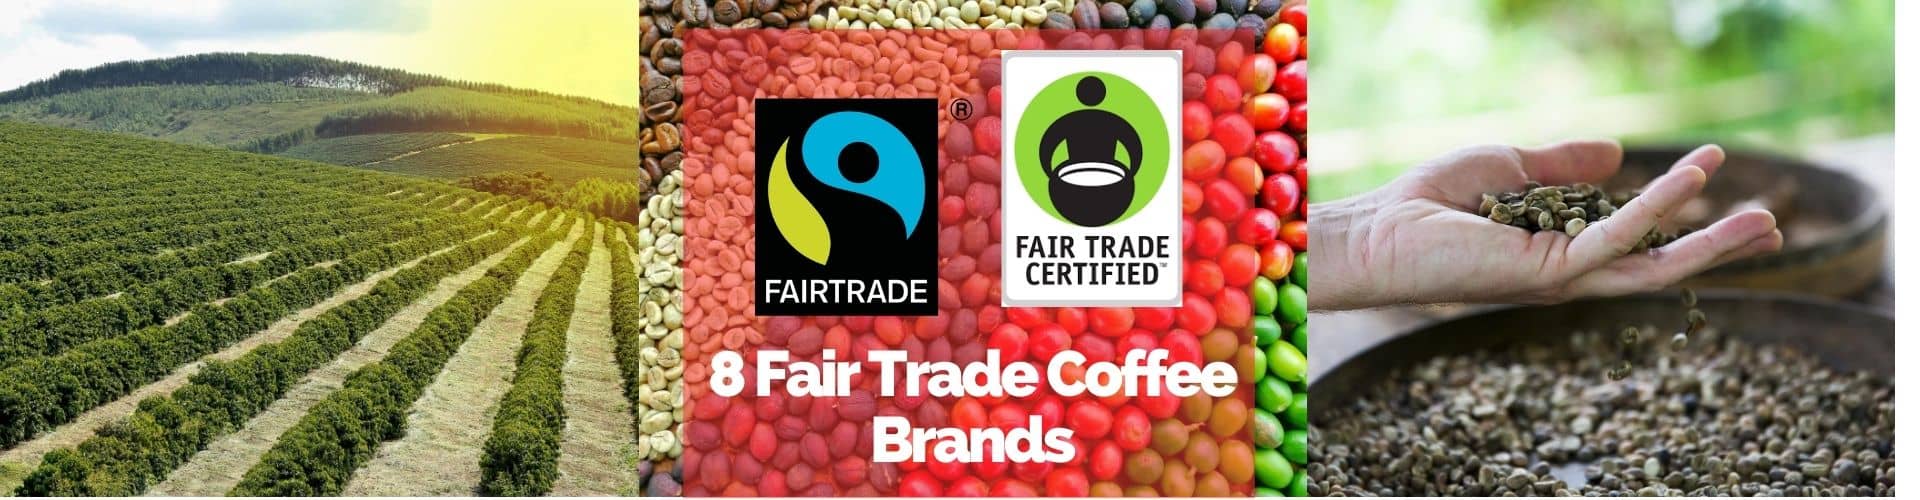 8 Fair Trade Coffee Brands that Support Social and Environmental Efforts